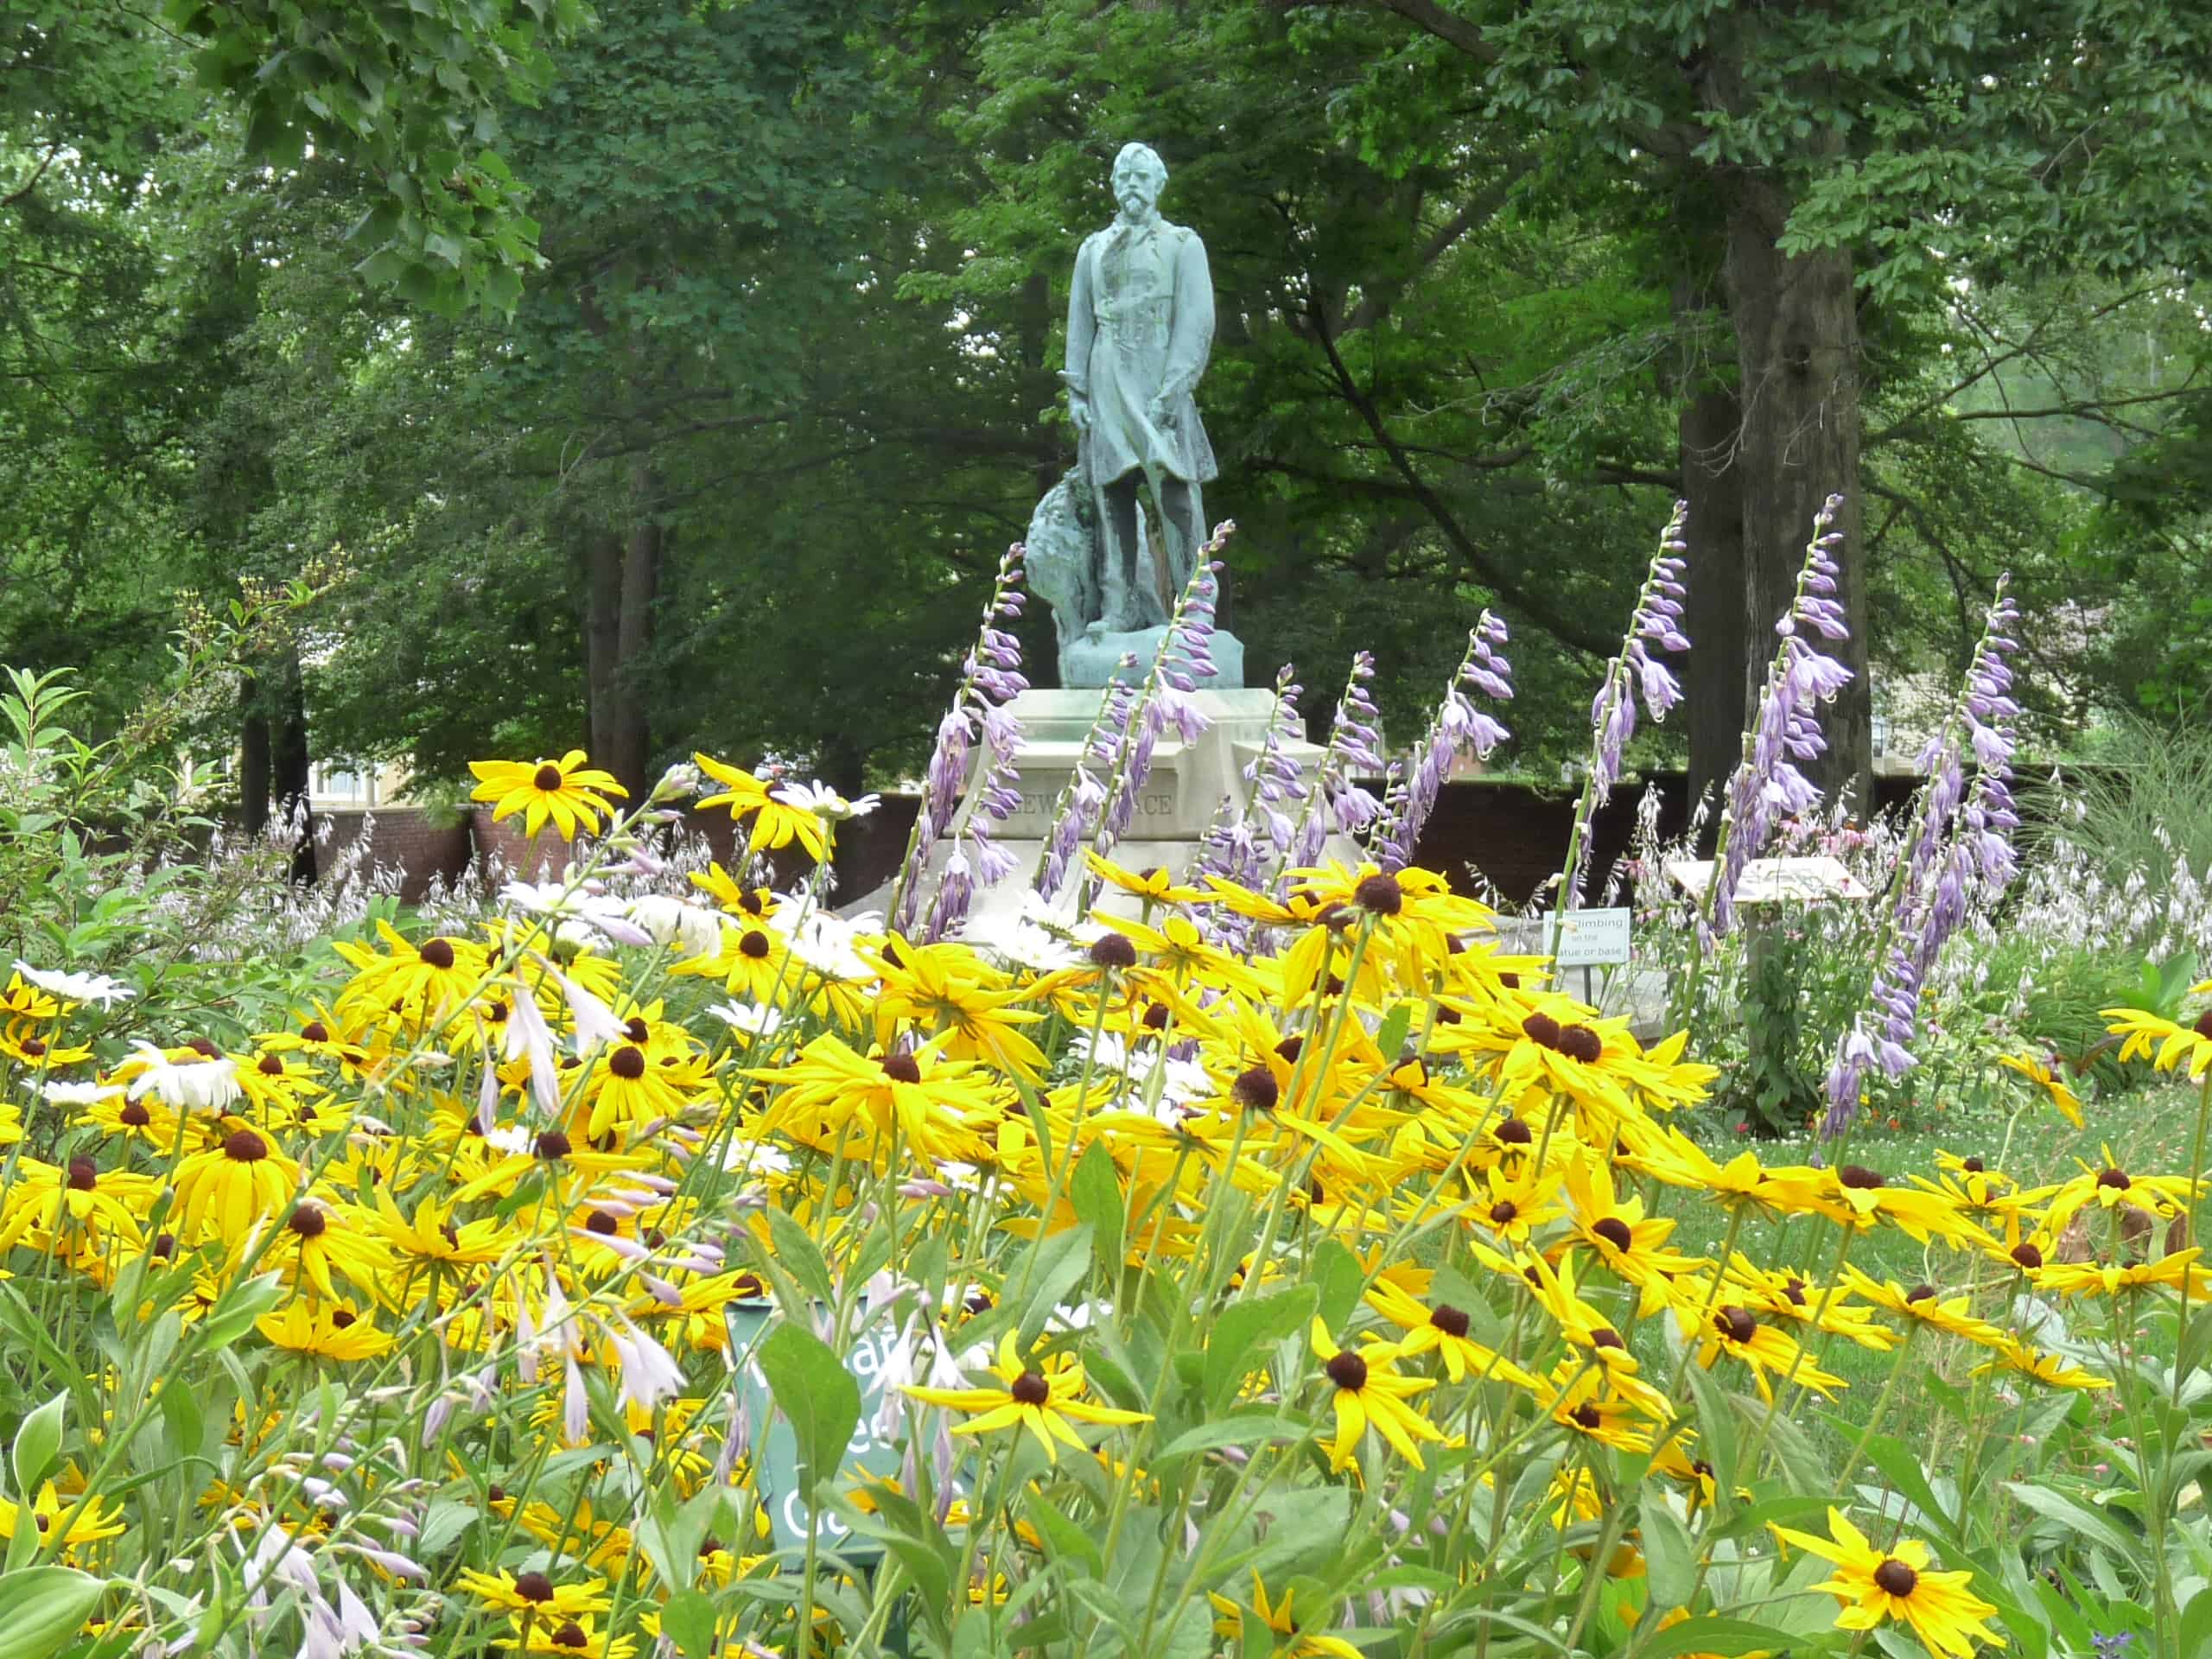 Statue of Lew Wallace with yellow flowers in front of it